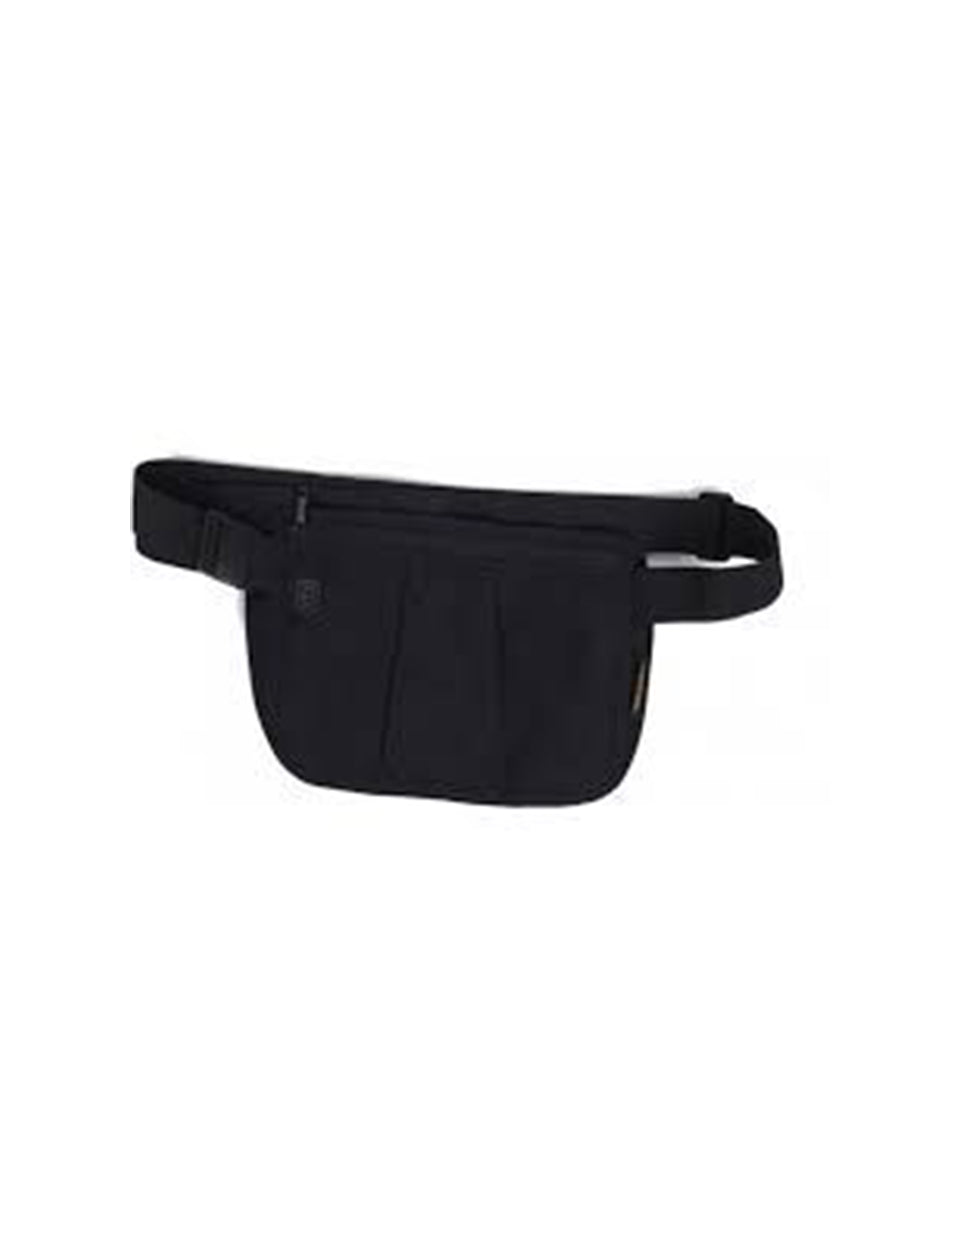 Discovery Adventure RFID Blocking Waist Pouch Grey Dhf74732